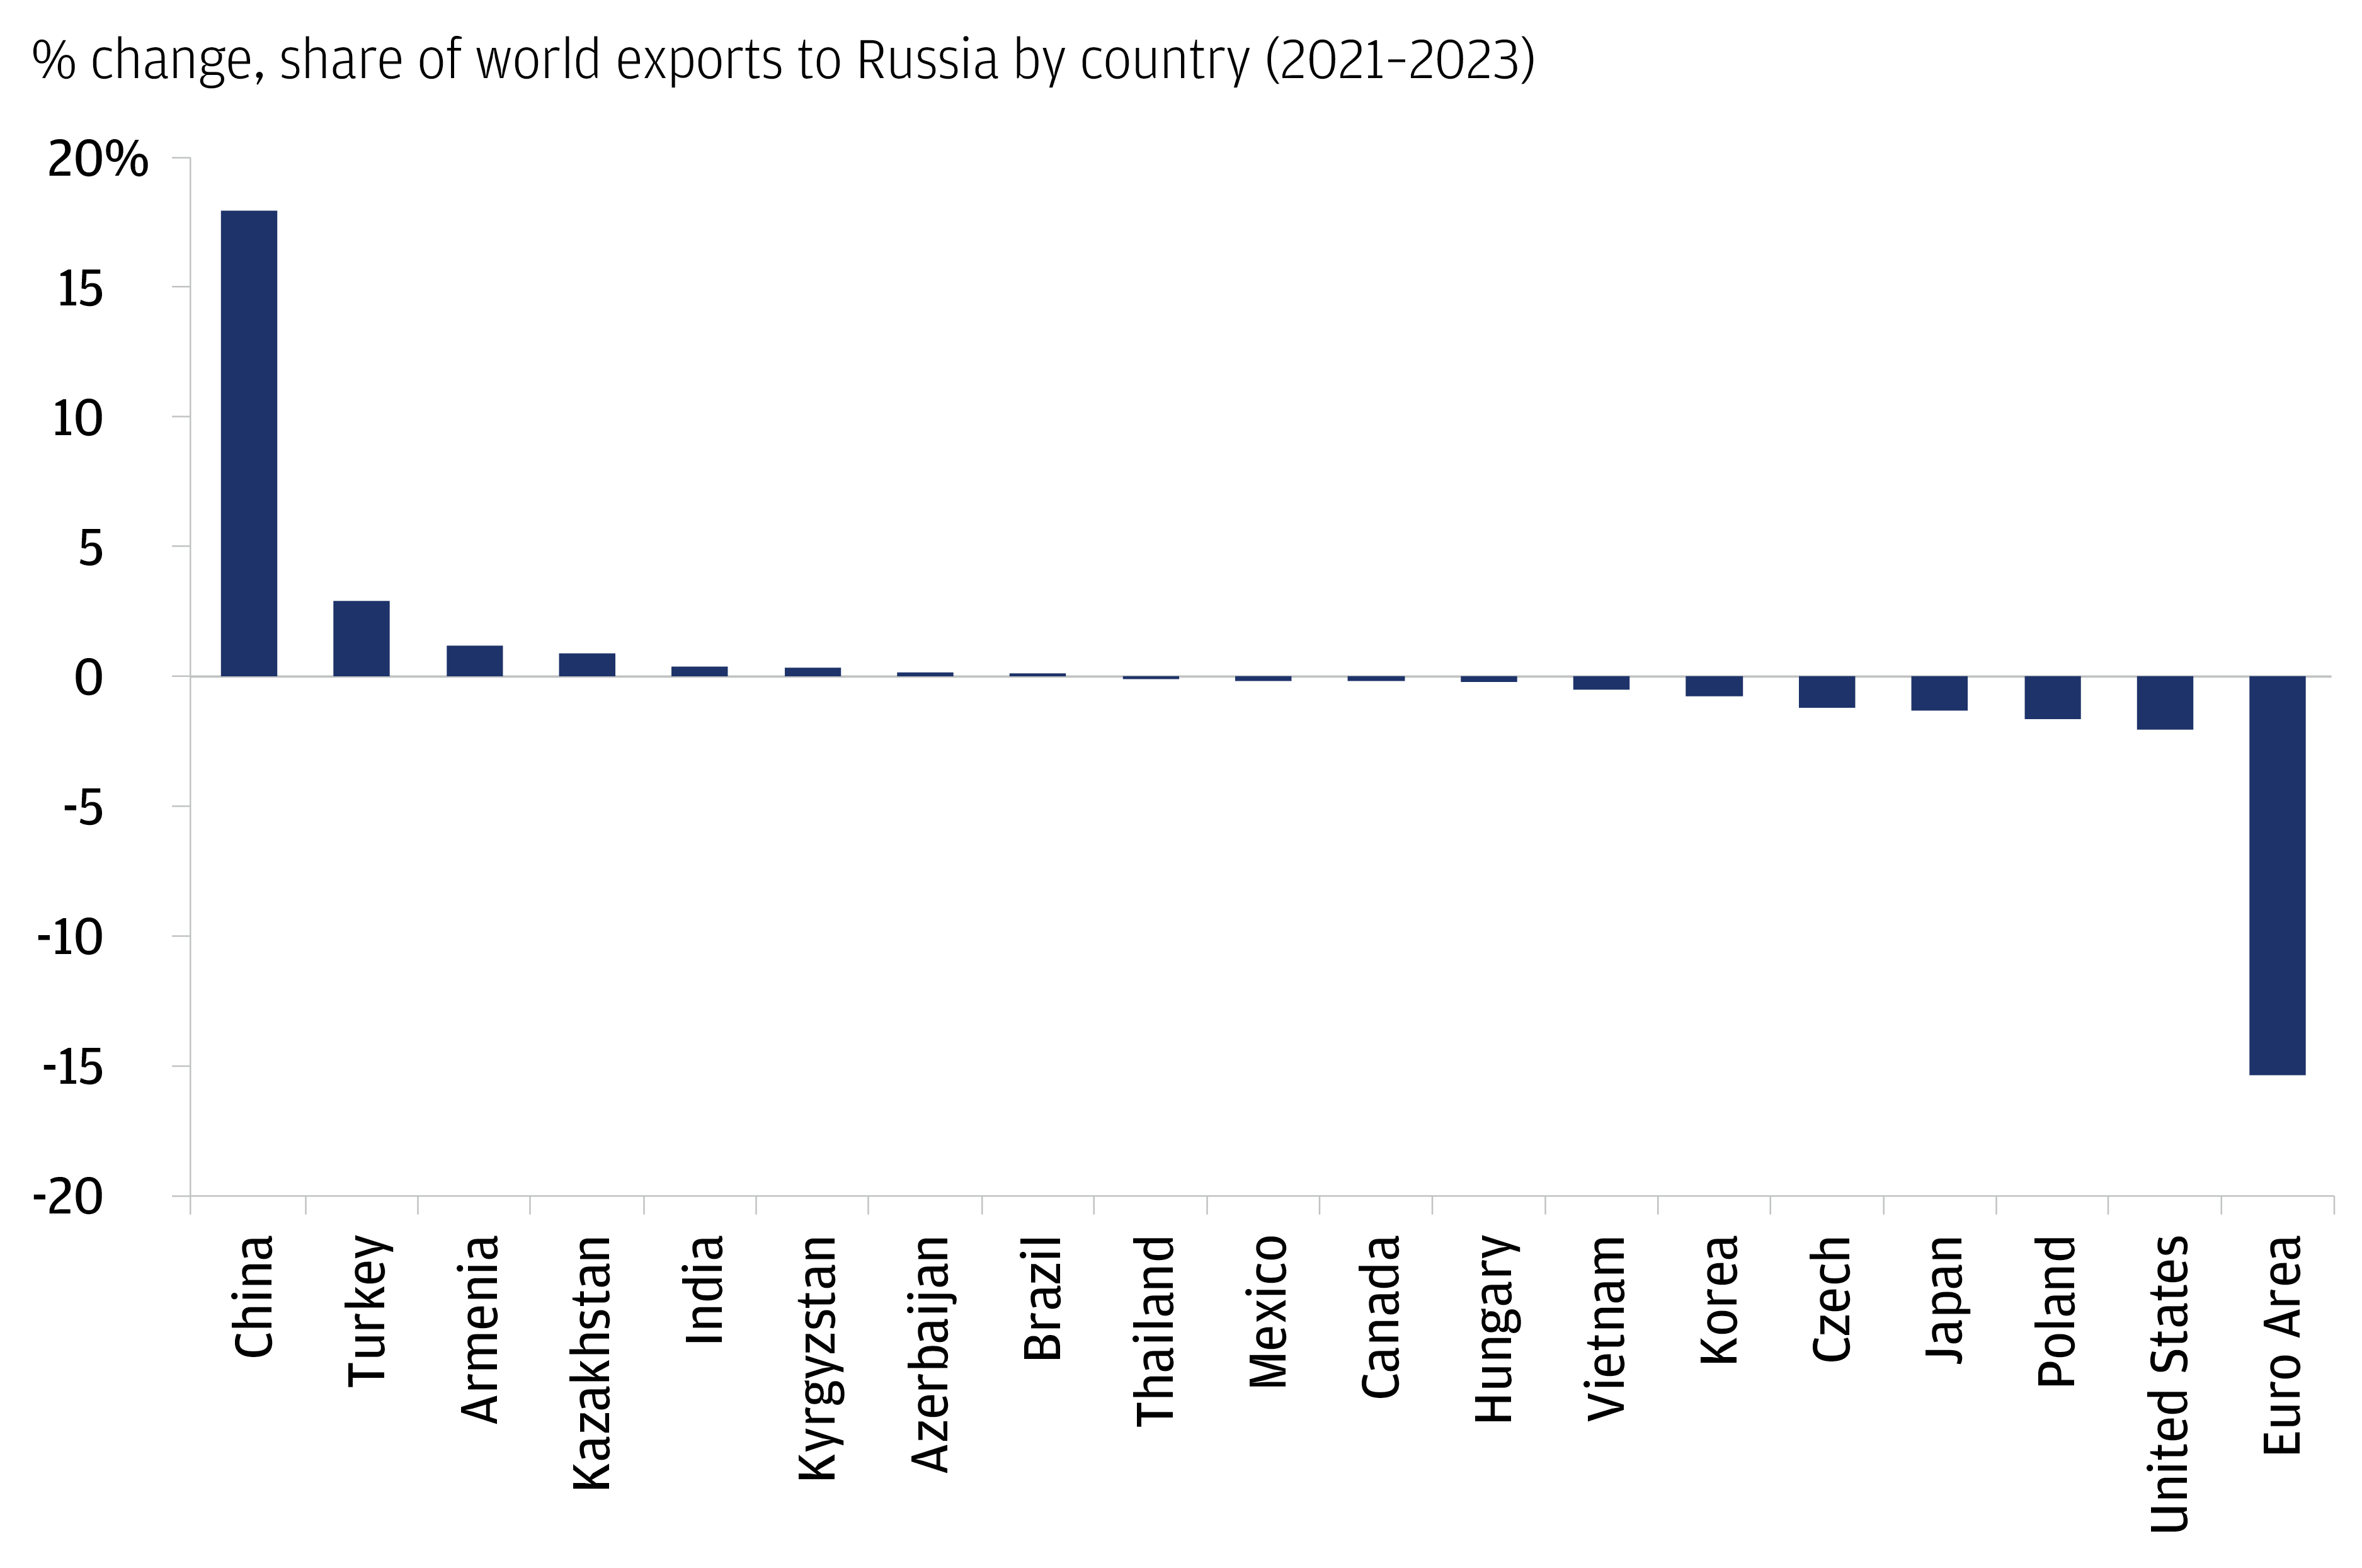 The chart describes the % change in share of world exports to Russia by country from 2021 to 2023. 